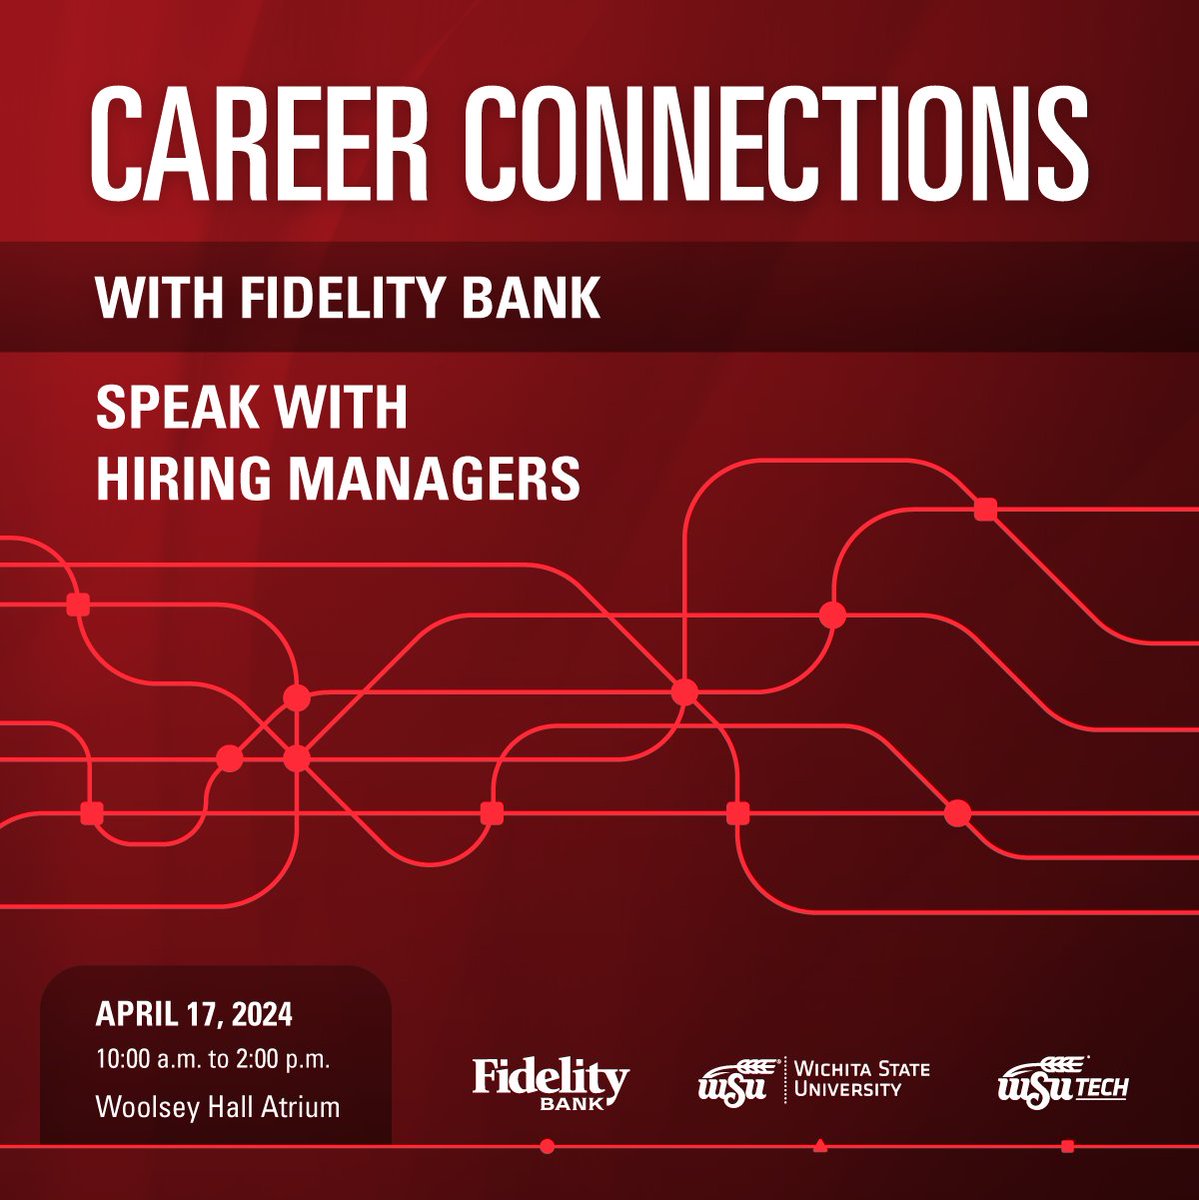 Fidelity Bank Career Connections Day is on April 17 from 10 a.m. - 2 p.m. in the Woolsey Hall Atrium. Fidelity is coming to bring incredible job opportunities to YOU! Register at 🔗 wichitastate.joinhandshake.com/events/1515721…

#ShockersUp #CareerJourney @KSfidelitybank @BartonSchoolWSU